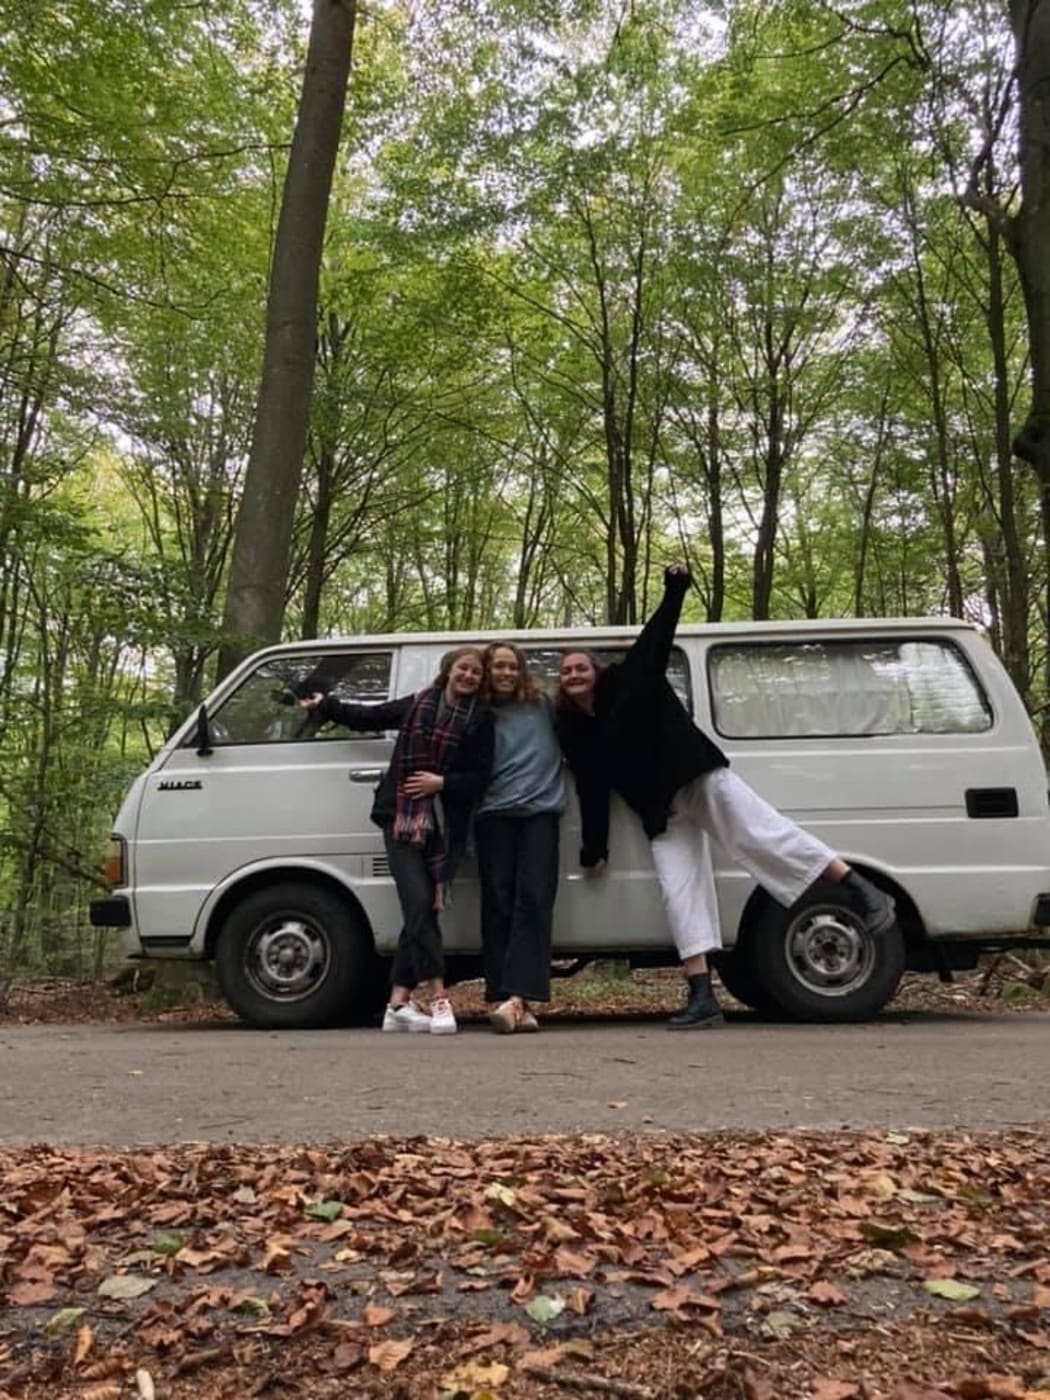 "Meg" and friends in front of their van.